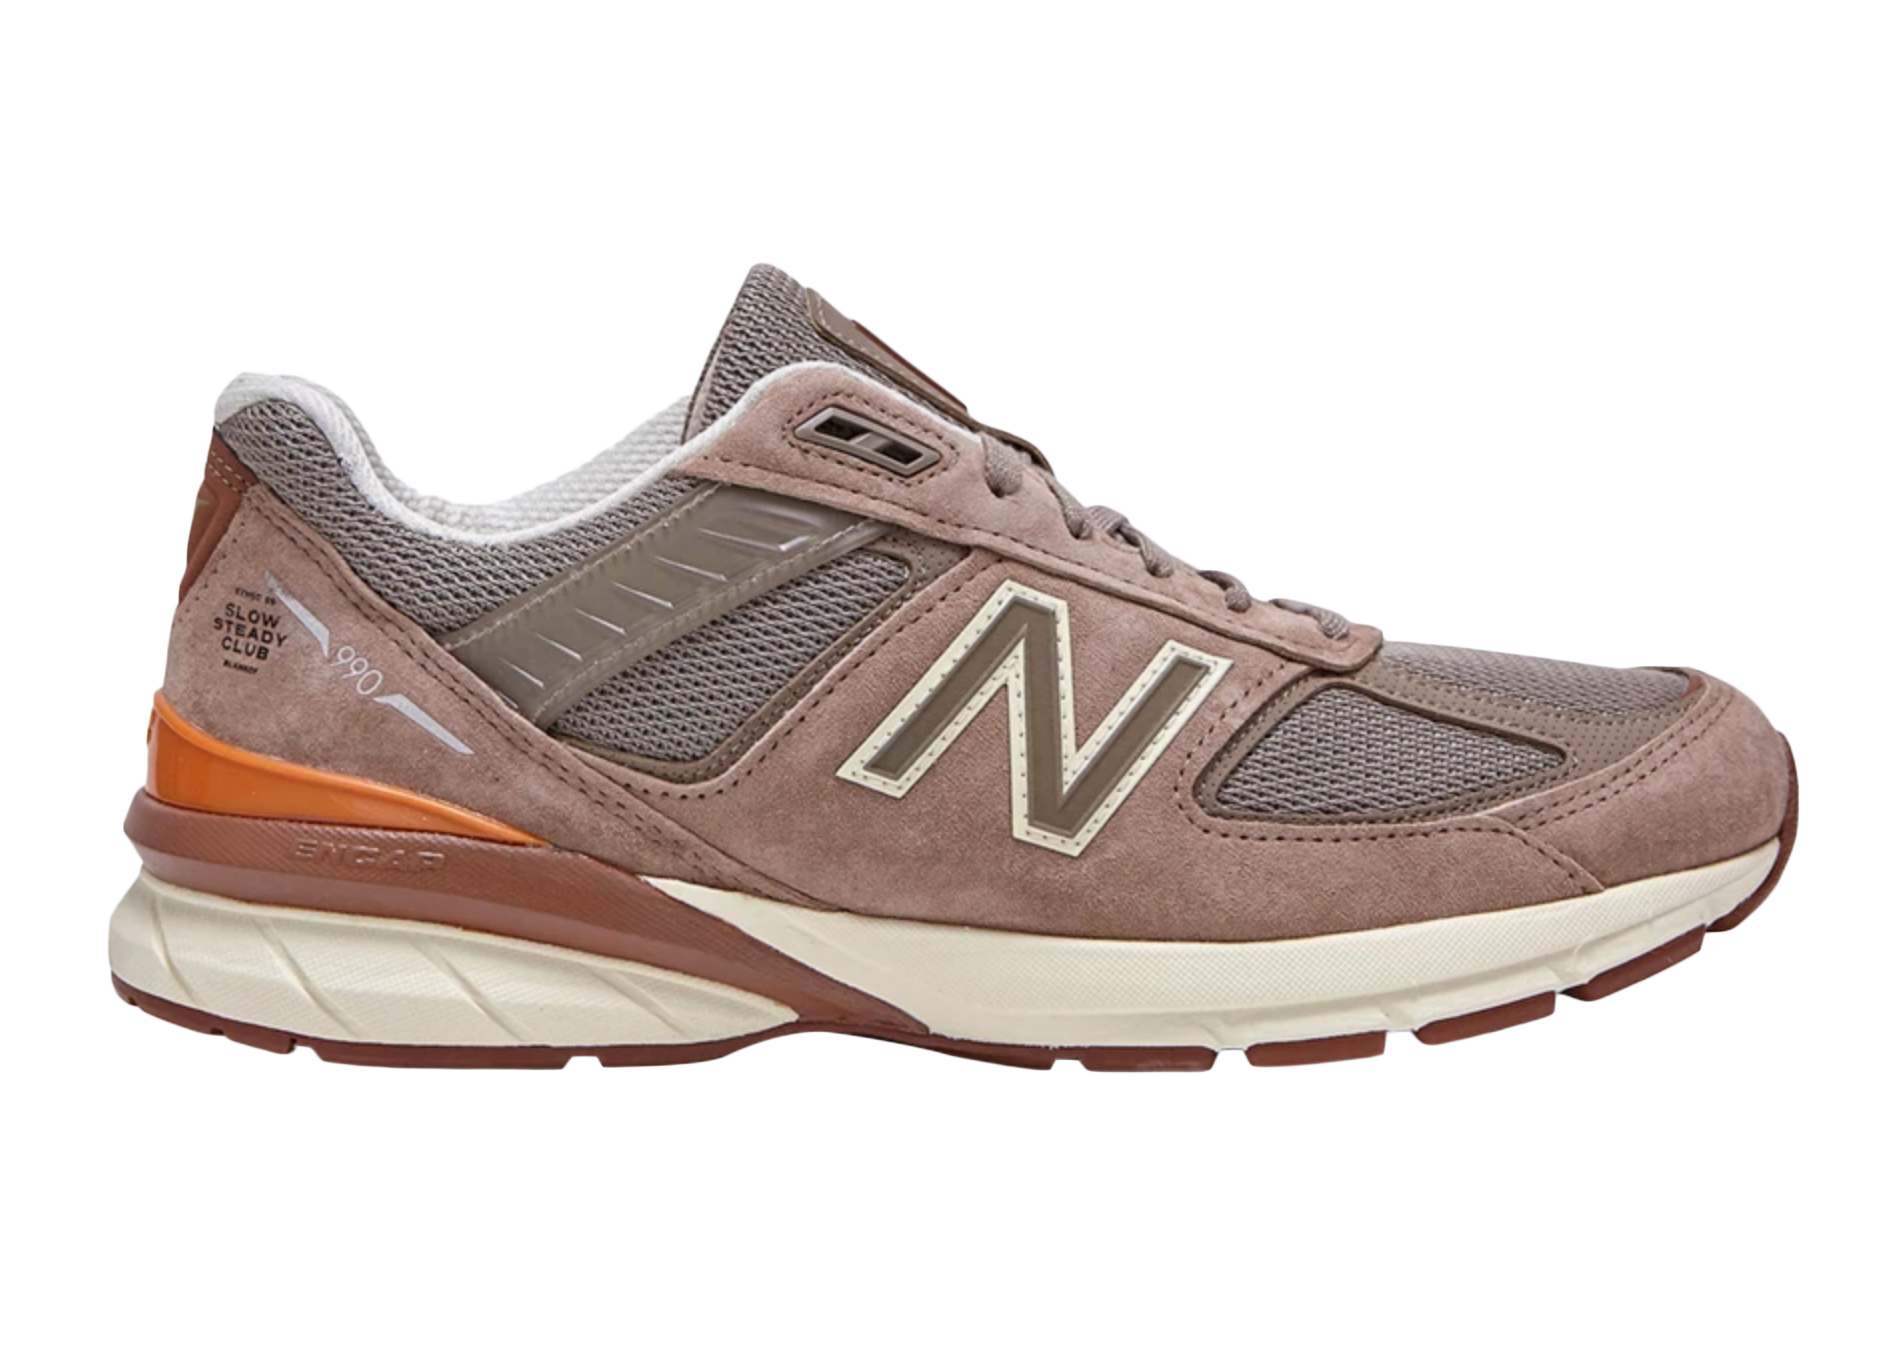 New Balance 990v5 Slow Steady Club MiUSA Brown Men's - Sneakers - US